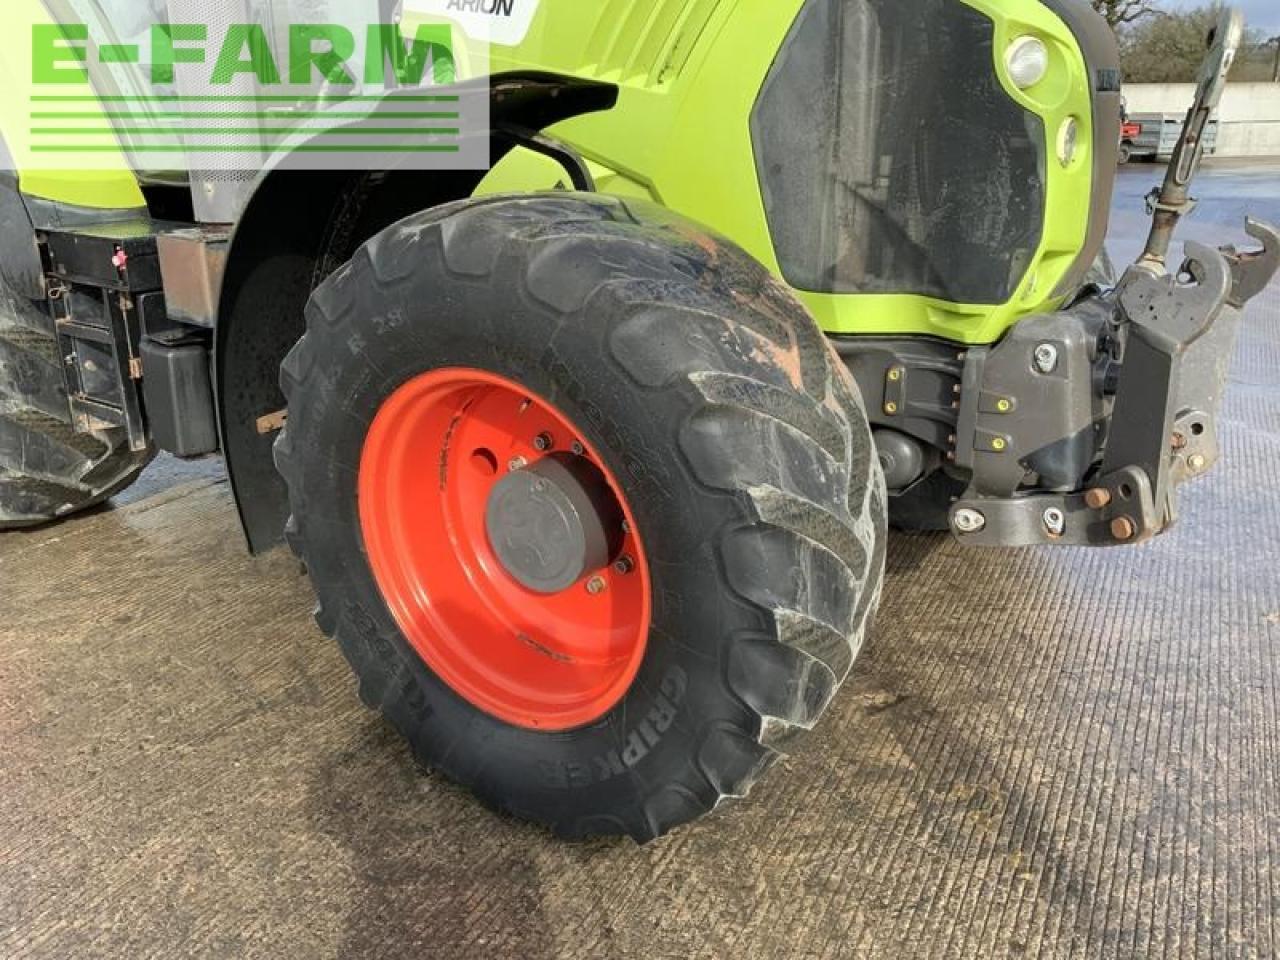 Tractor CLAAS 650 arion tractor (st15805)